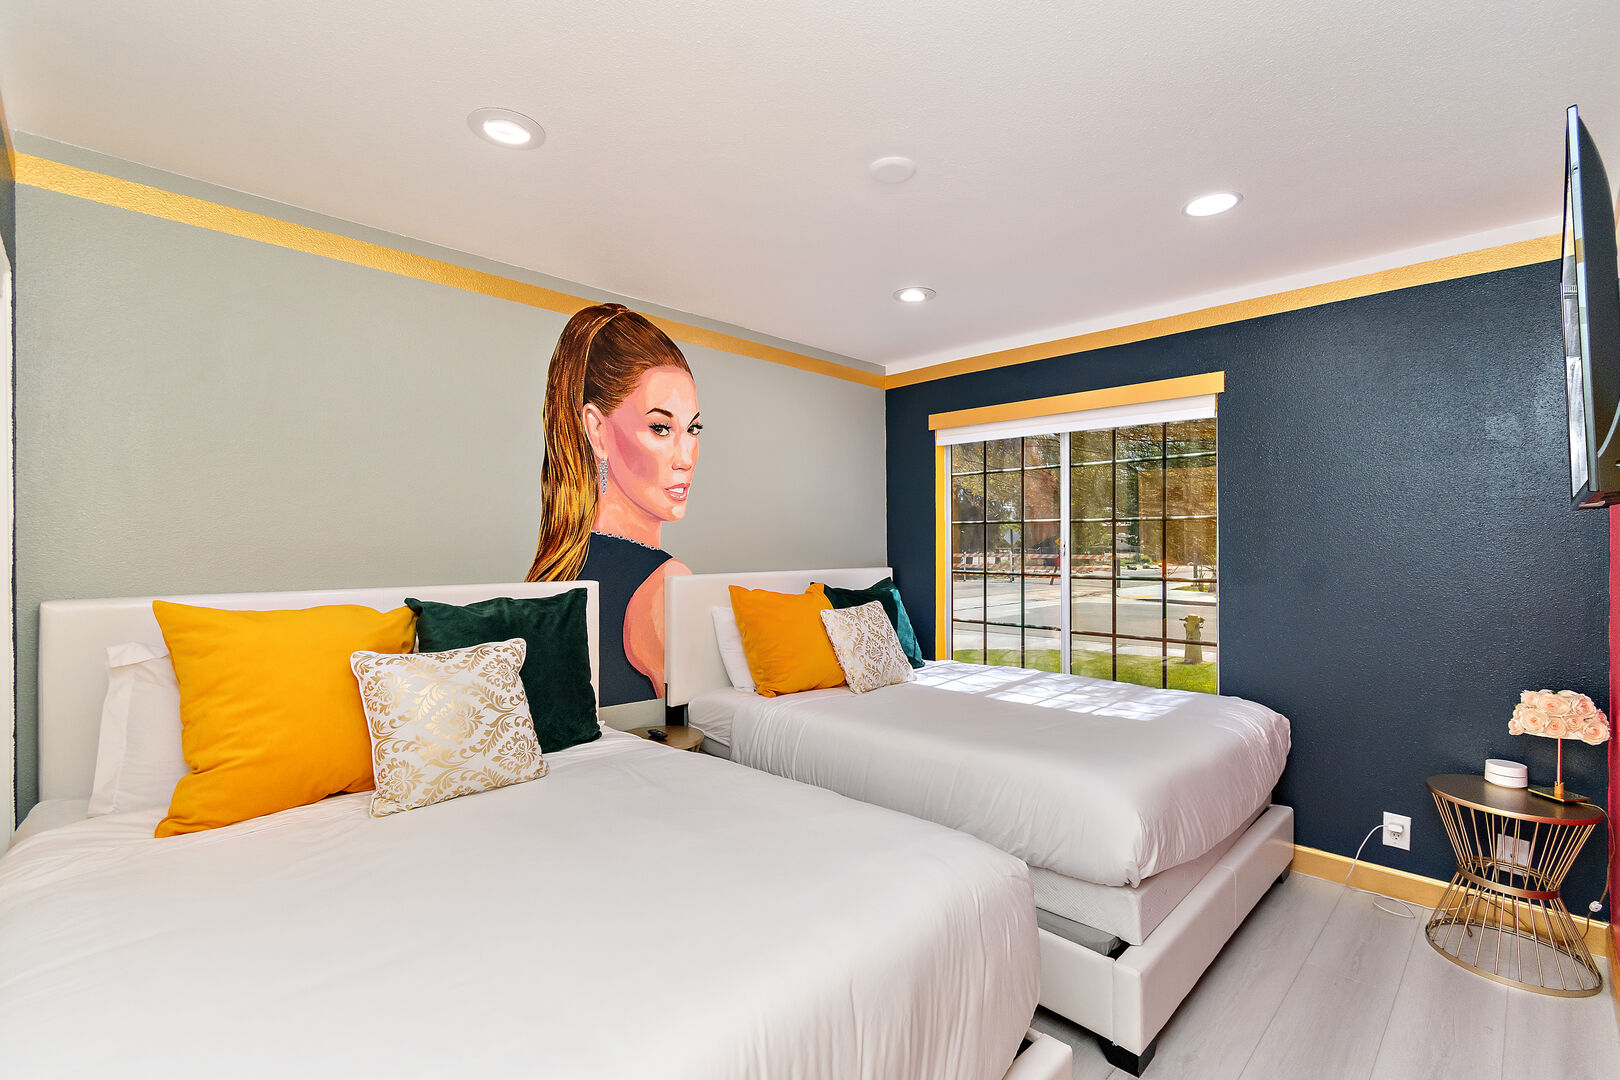 Bedroom 3 is located next to bedroom 4 and features two Queen-sized Beds, a 40-inch TCL with Roku Smart television, and a Jennifer Lopez mural.